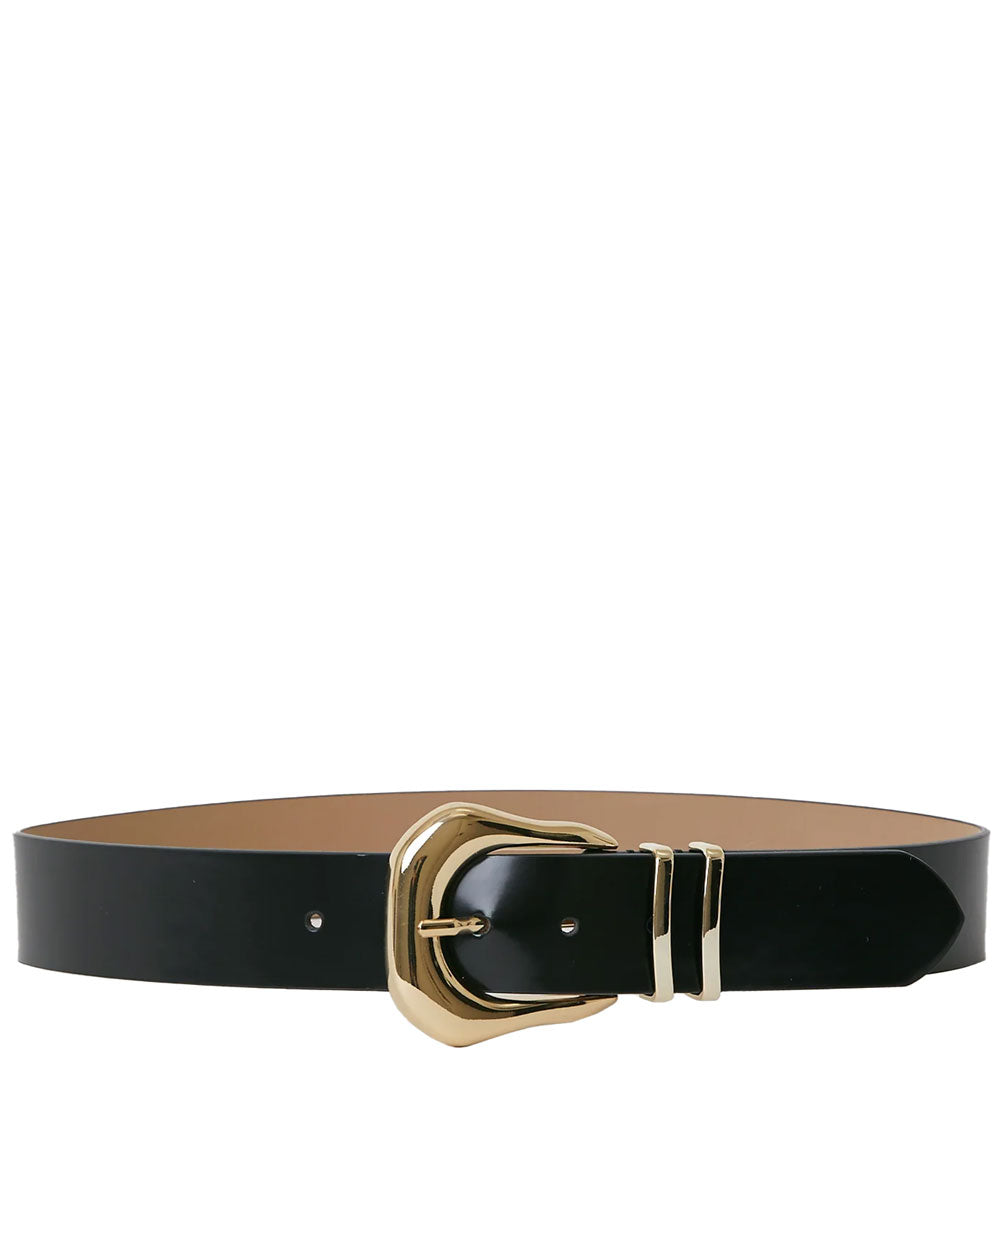 Koda Mod Leather Belt in Black and Gold